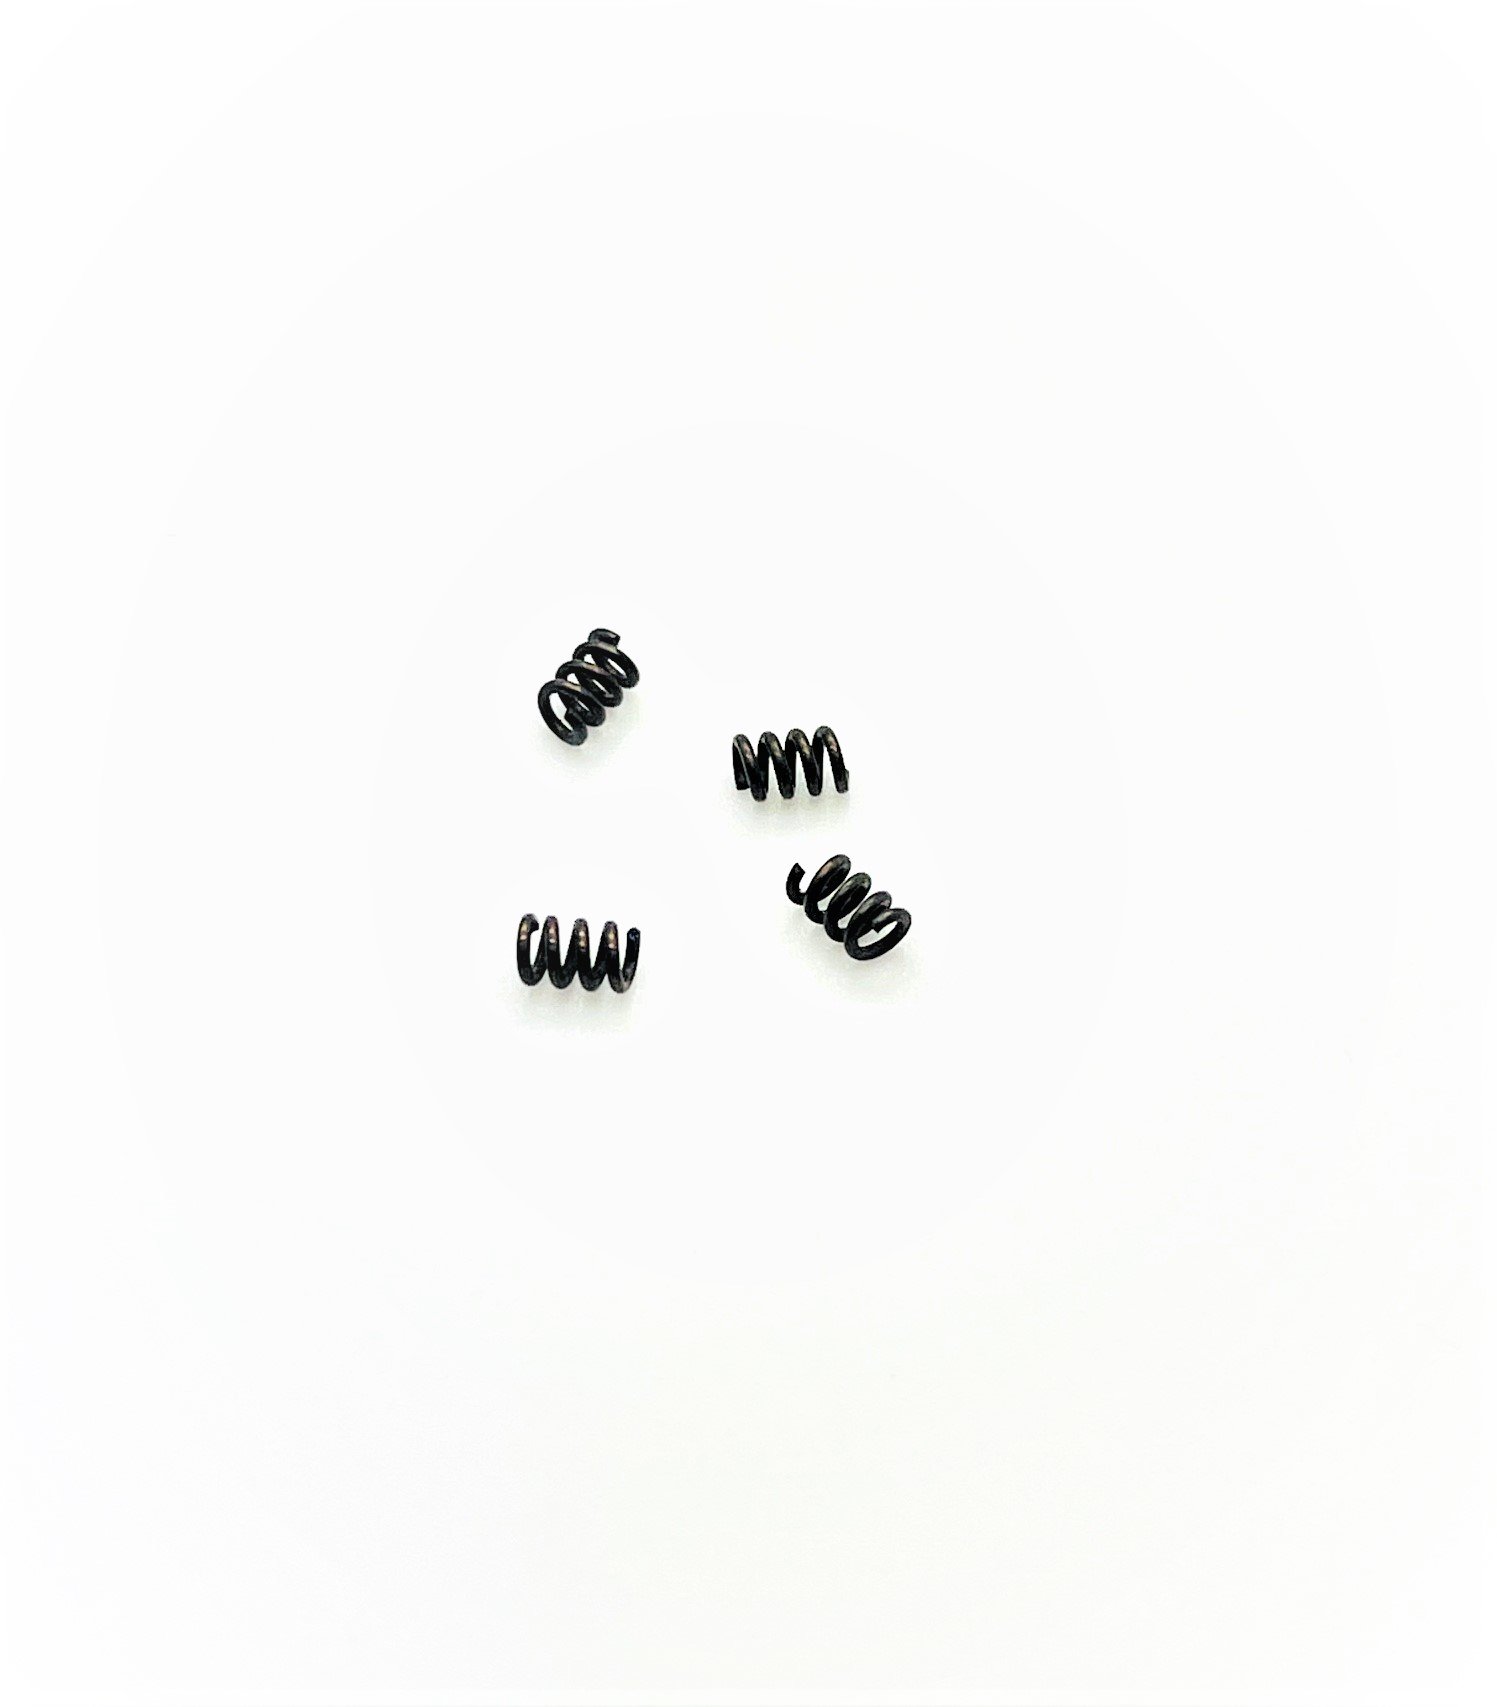 Springs X4 for BUL extractor